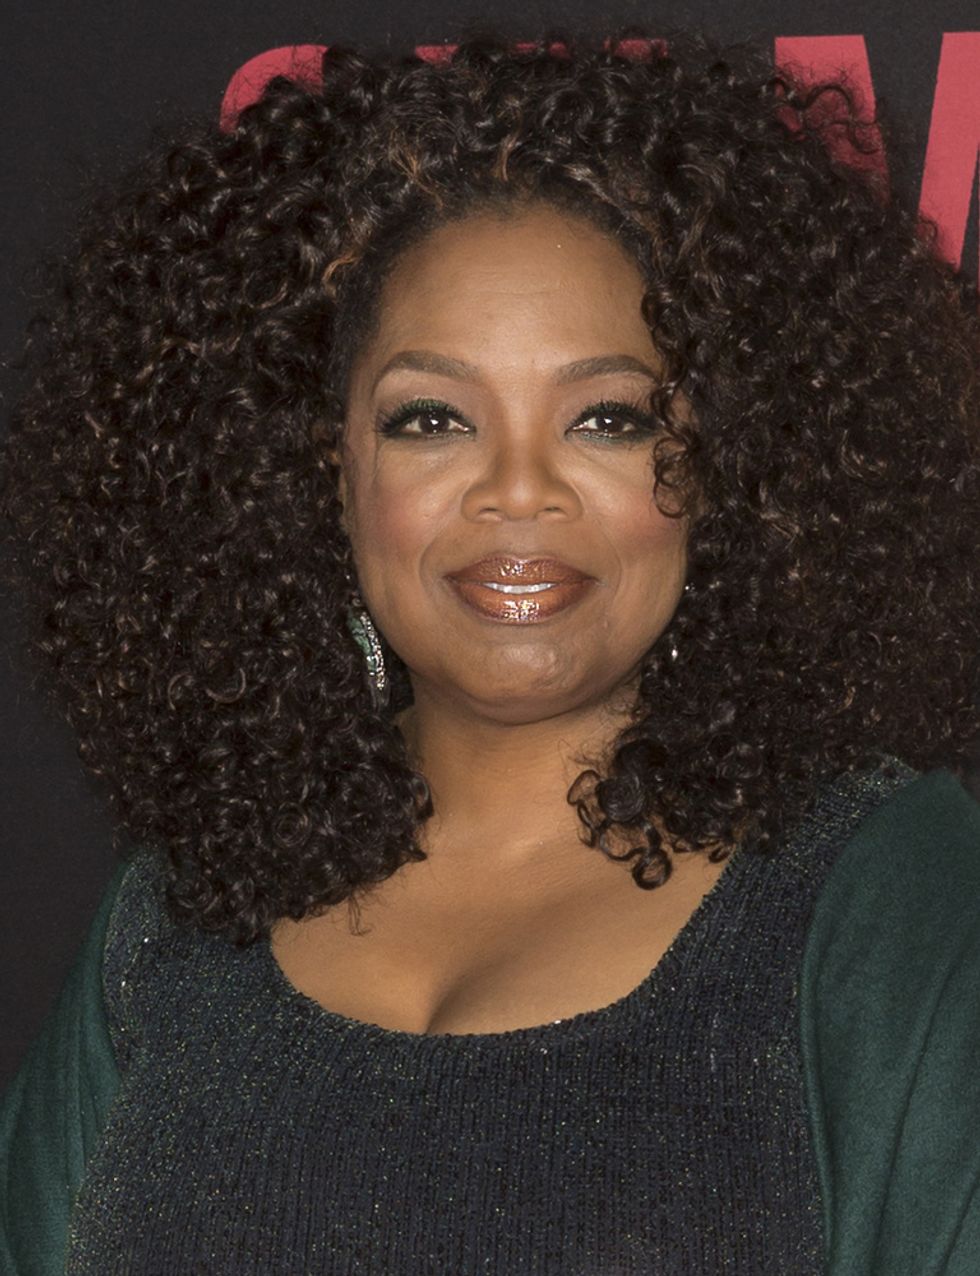 10 Remarkable Life Lessons from Oprah Winfrey That Will Inspire You